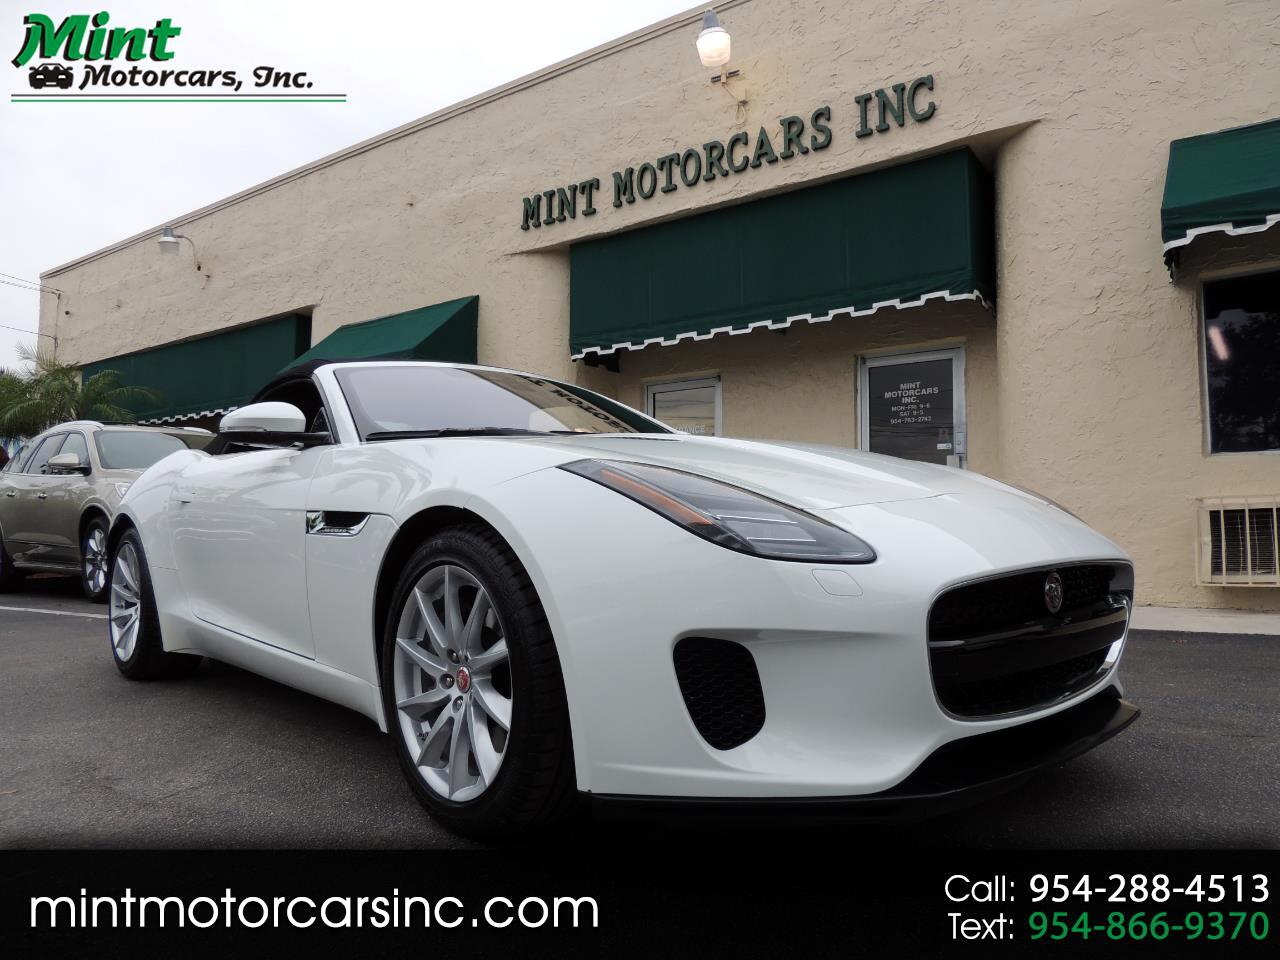 Used 2019 Jaguar F Type Convertible For Sale In Ft Lauderdale Fl